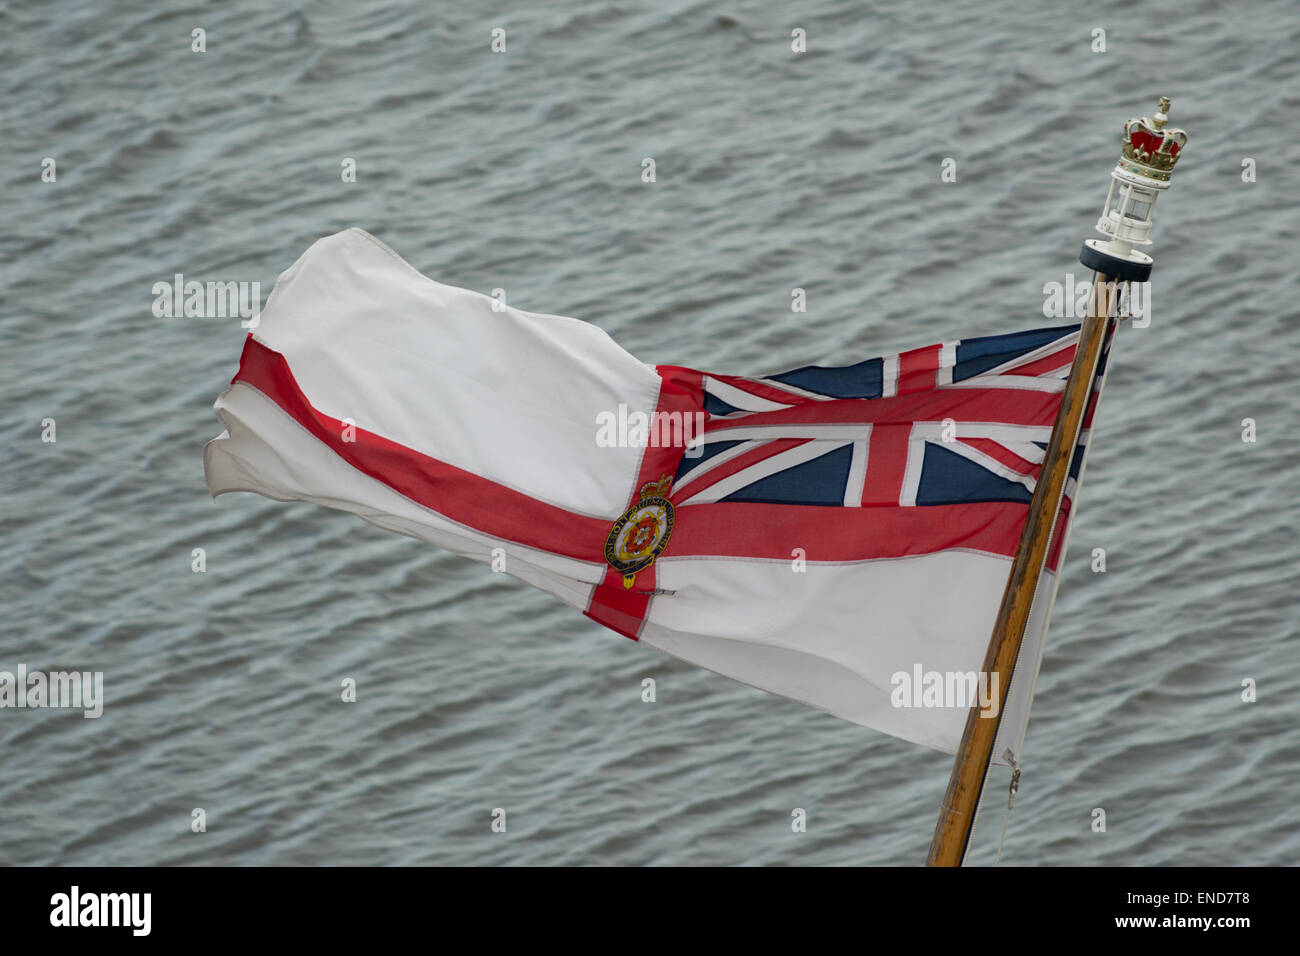 The White Ensign or the St George's Ensign flag flying from the Royal Yacht Britannia, Ocean Quay, Edinburgh, Scotland, UK Stock Photo